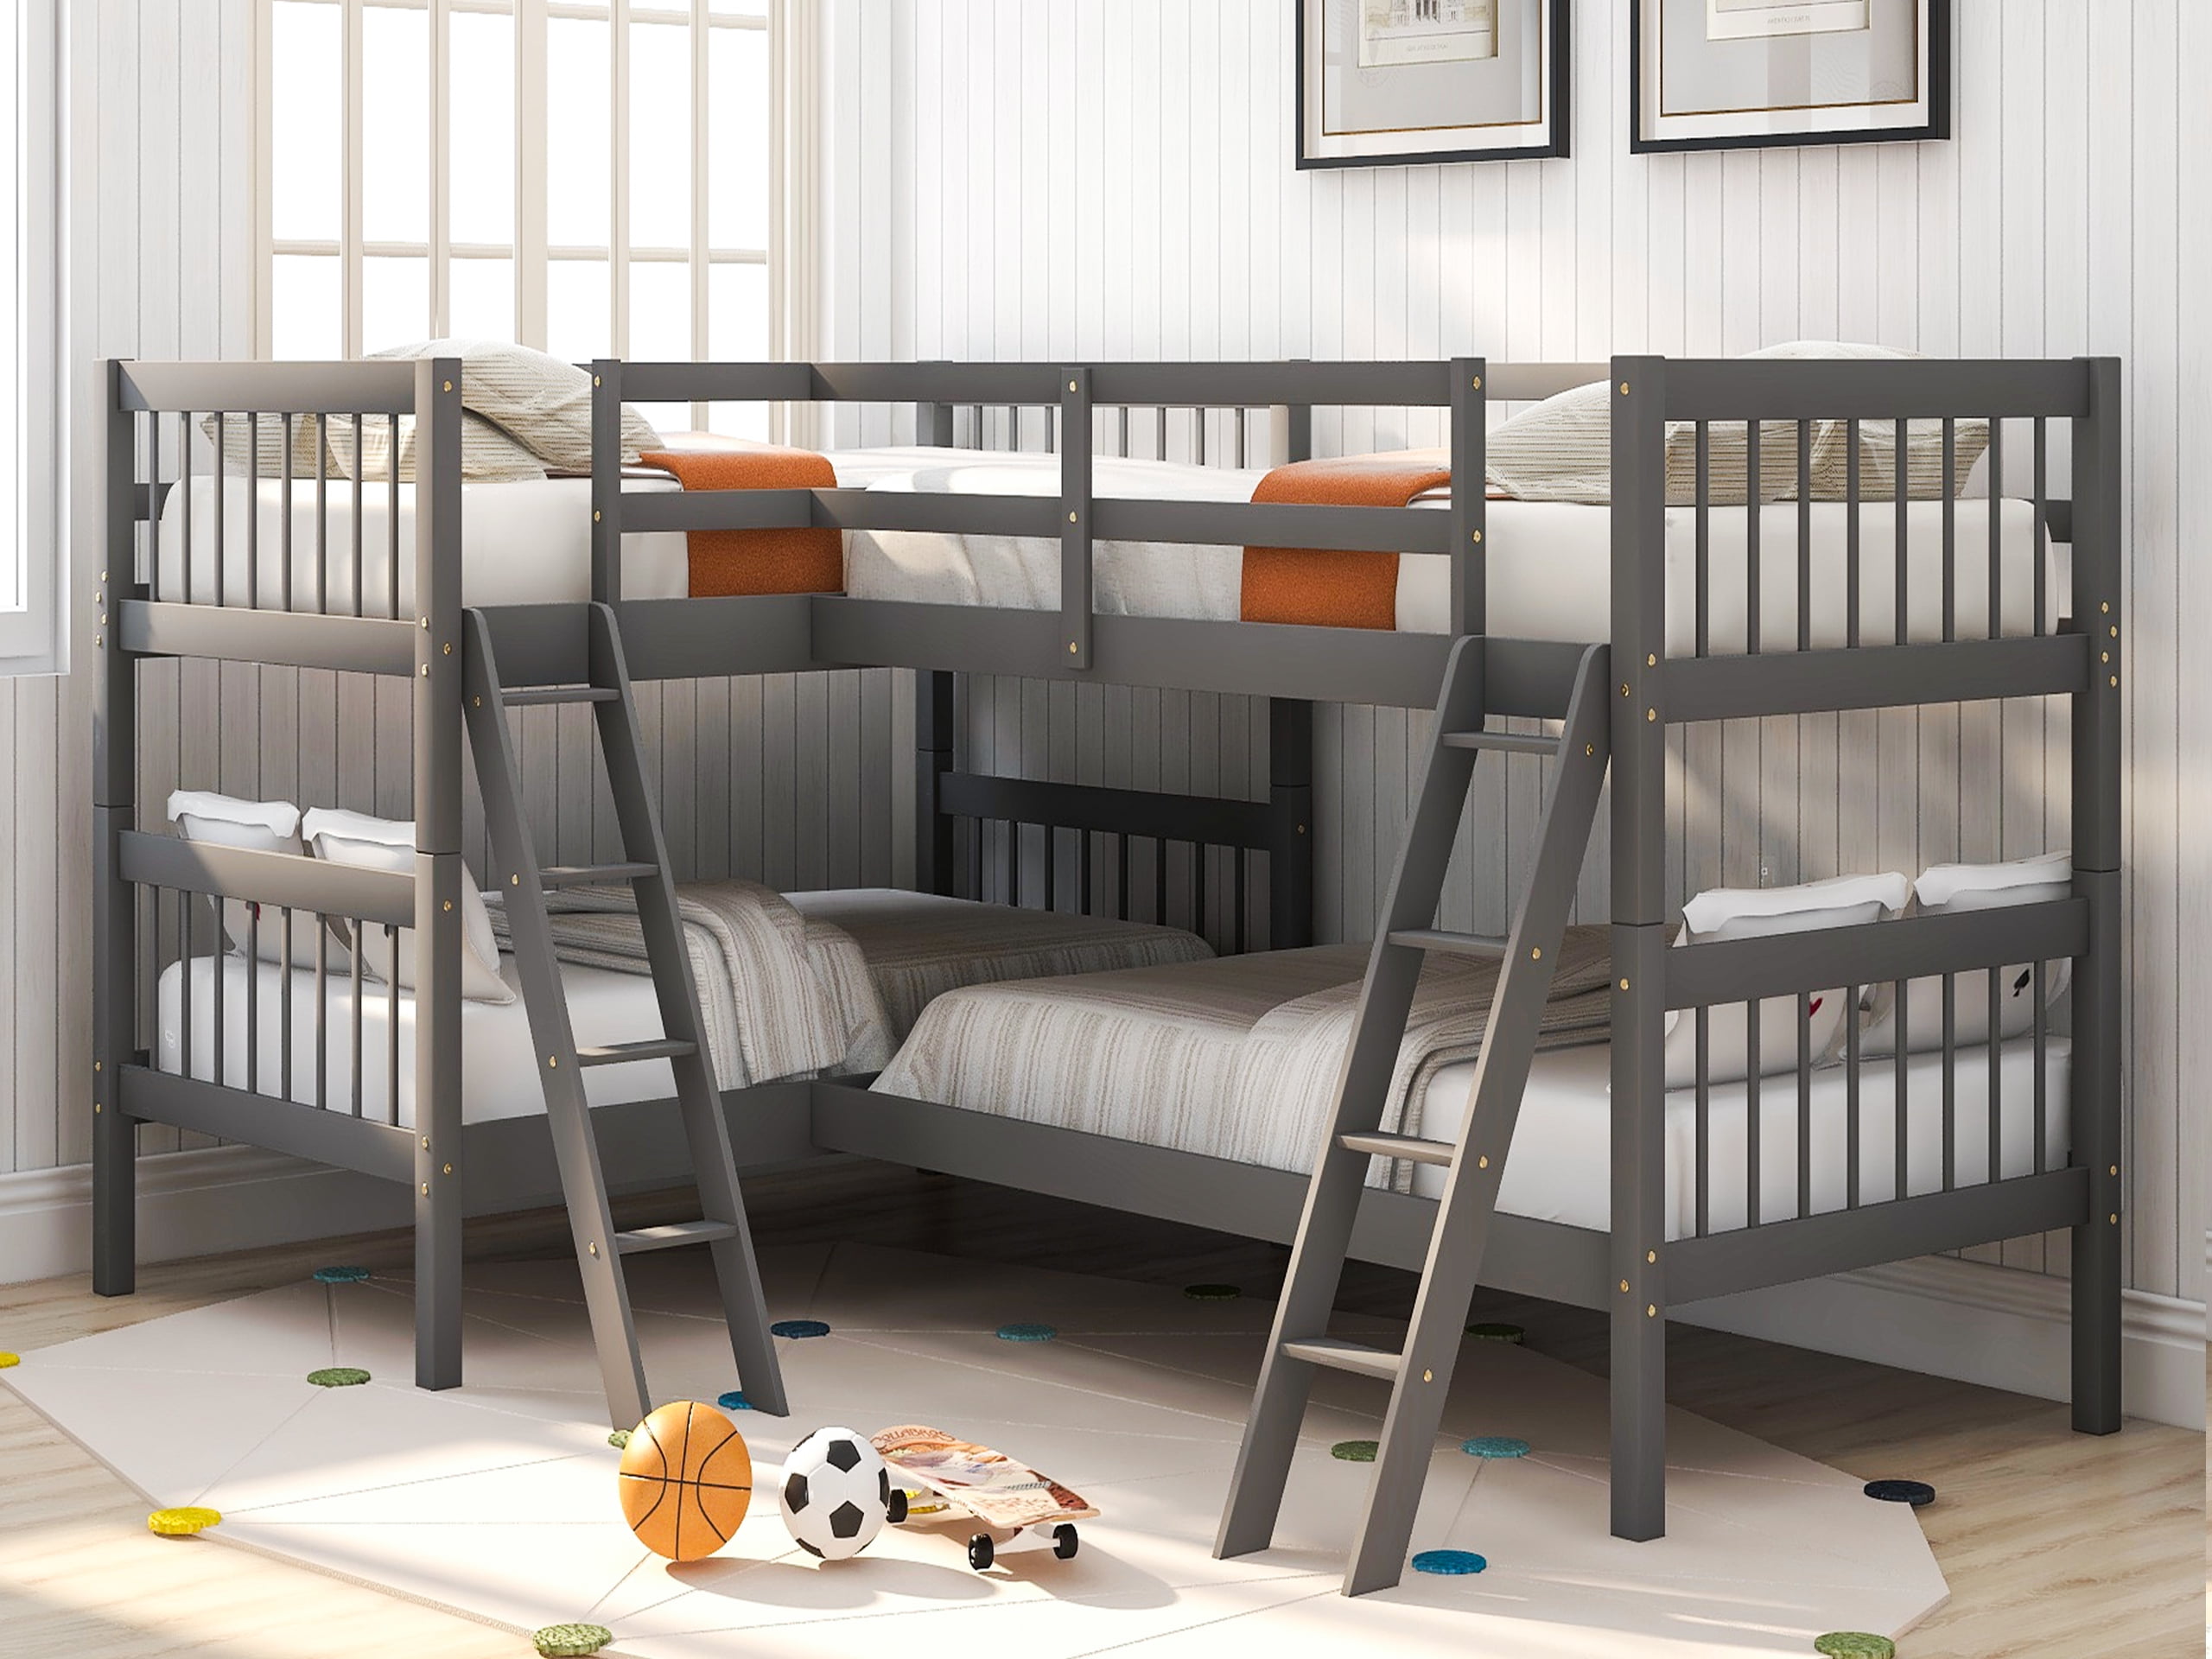 L Shaped Bunk Bed Twin Size Four Kids, Bunk Bed Ladders Sold Separately